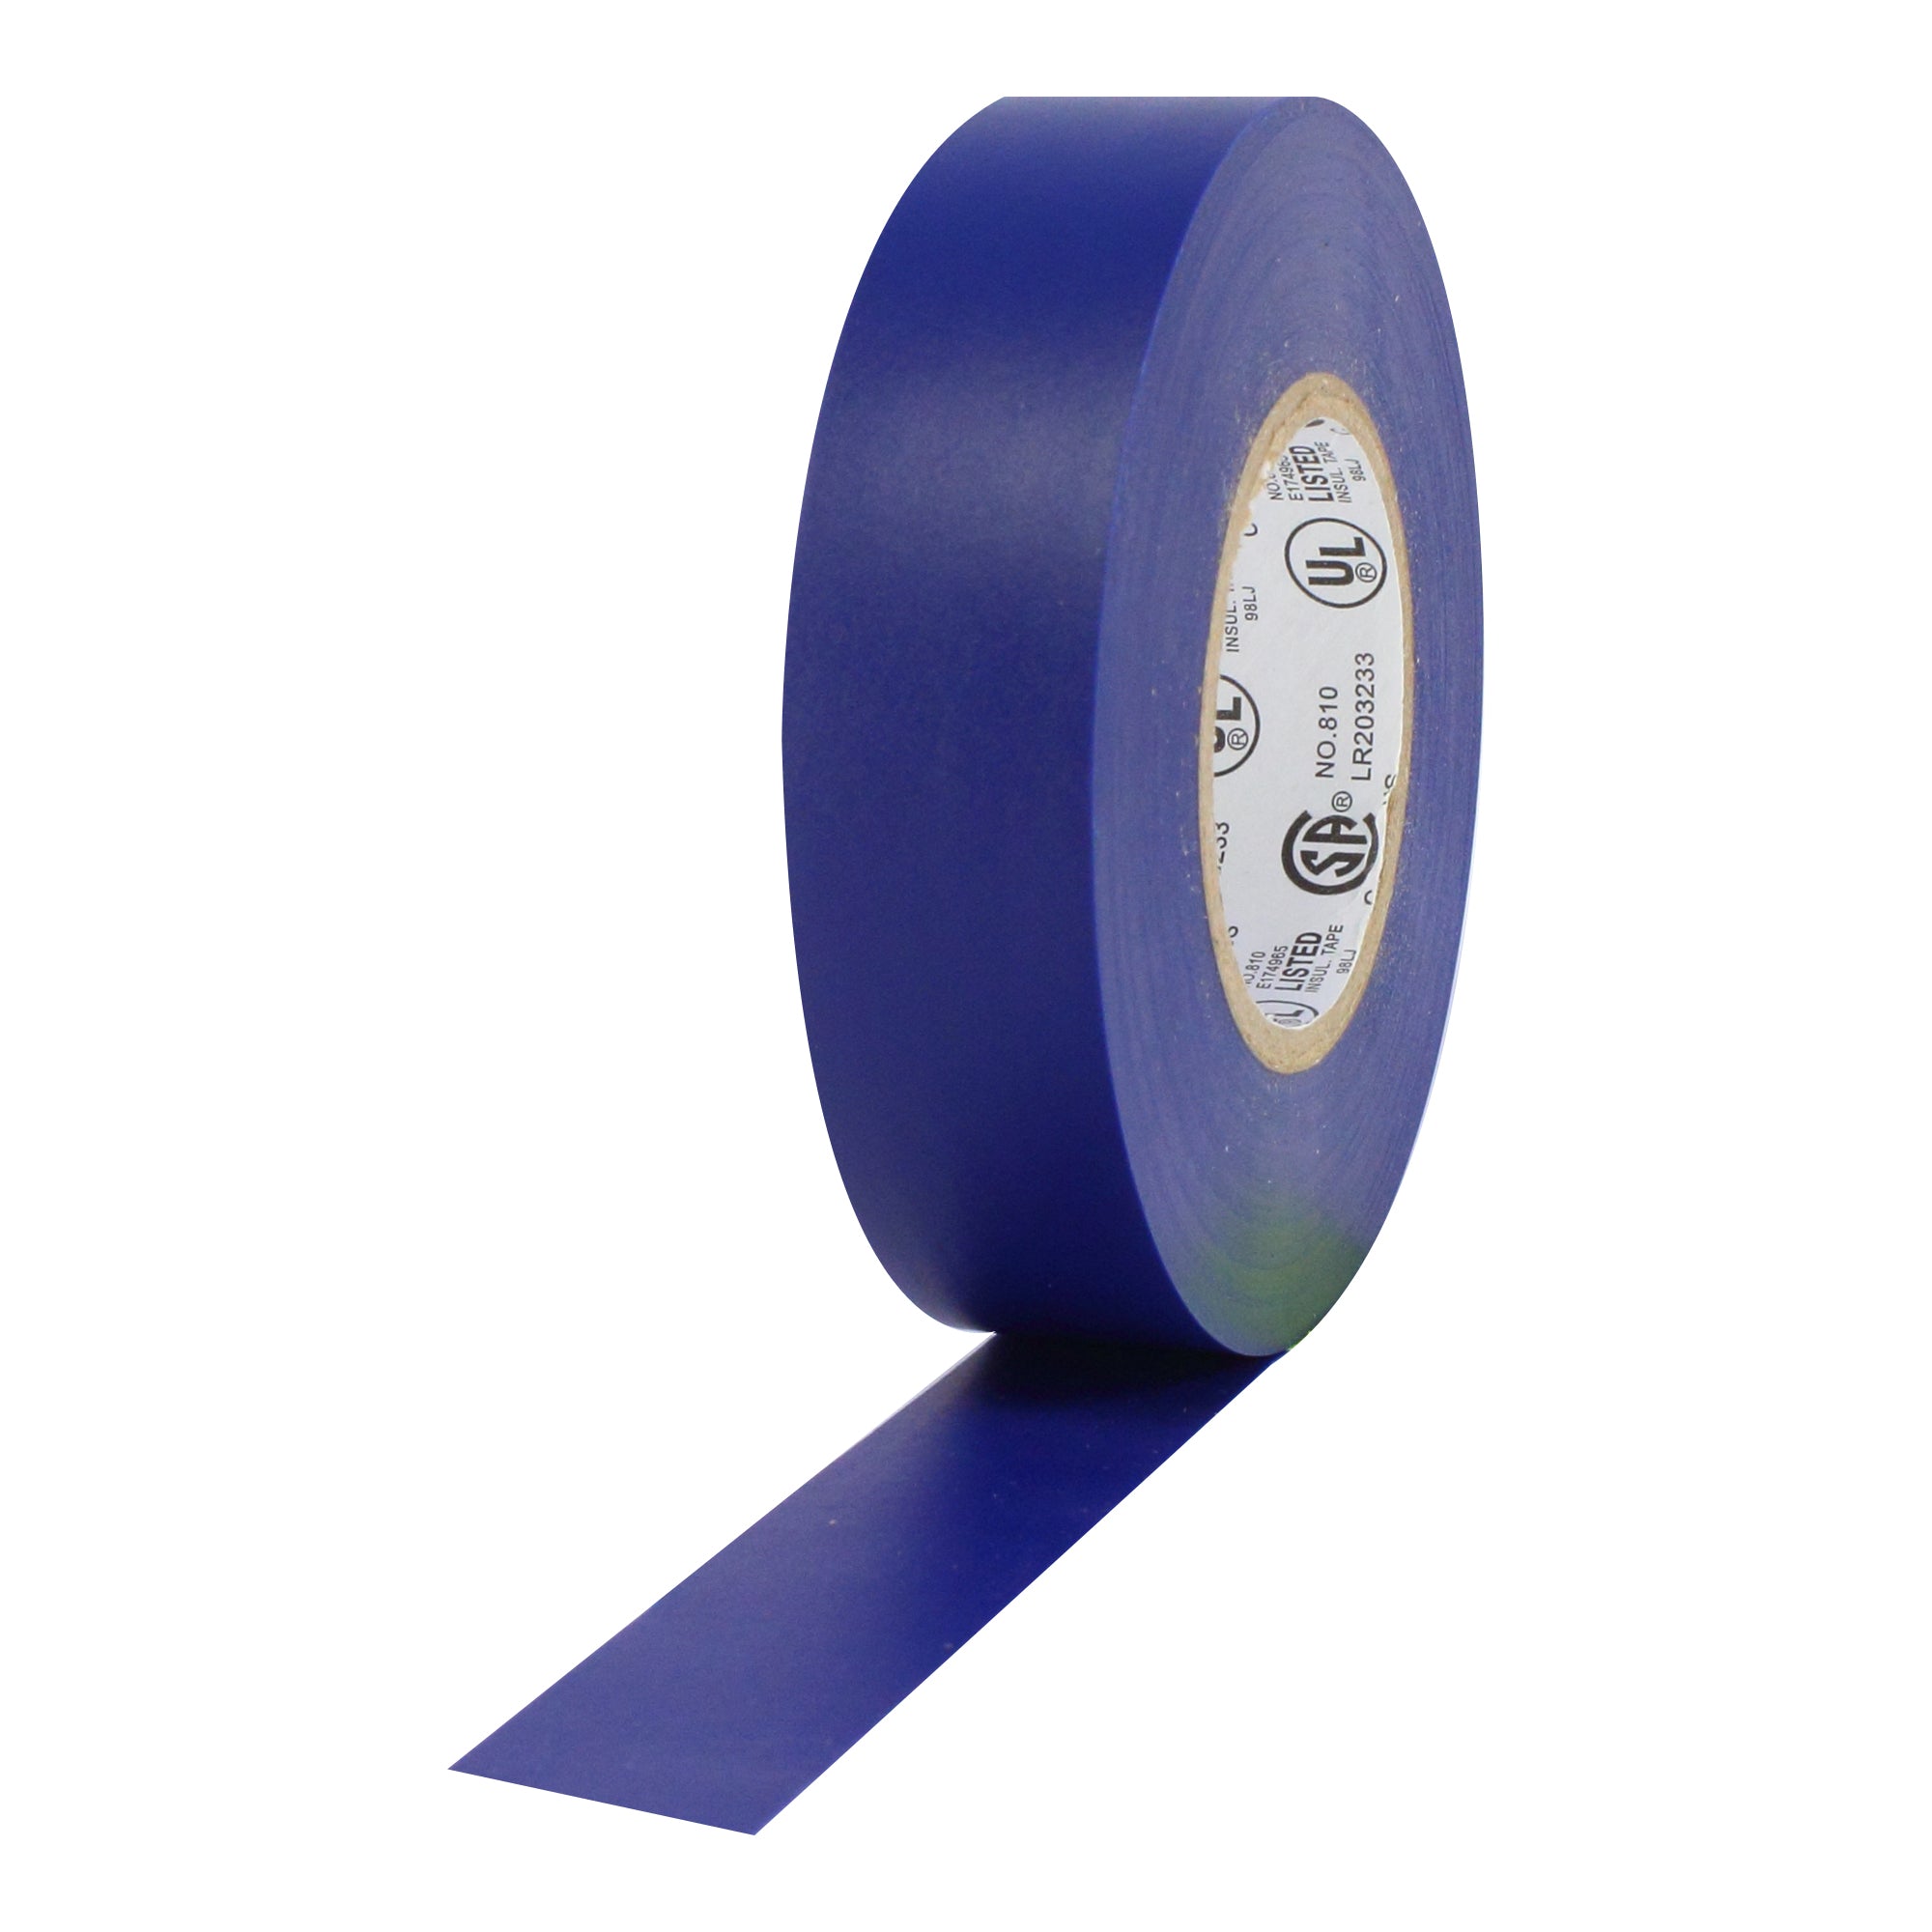 Pro Tapes Pro Plus Electrical Tape - 3/4" x 60', Blue